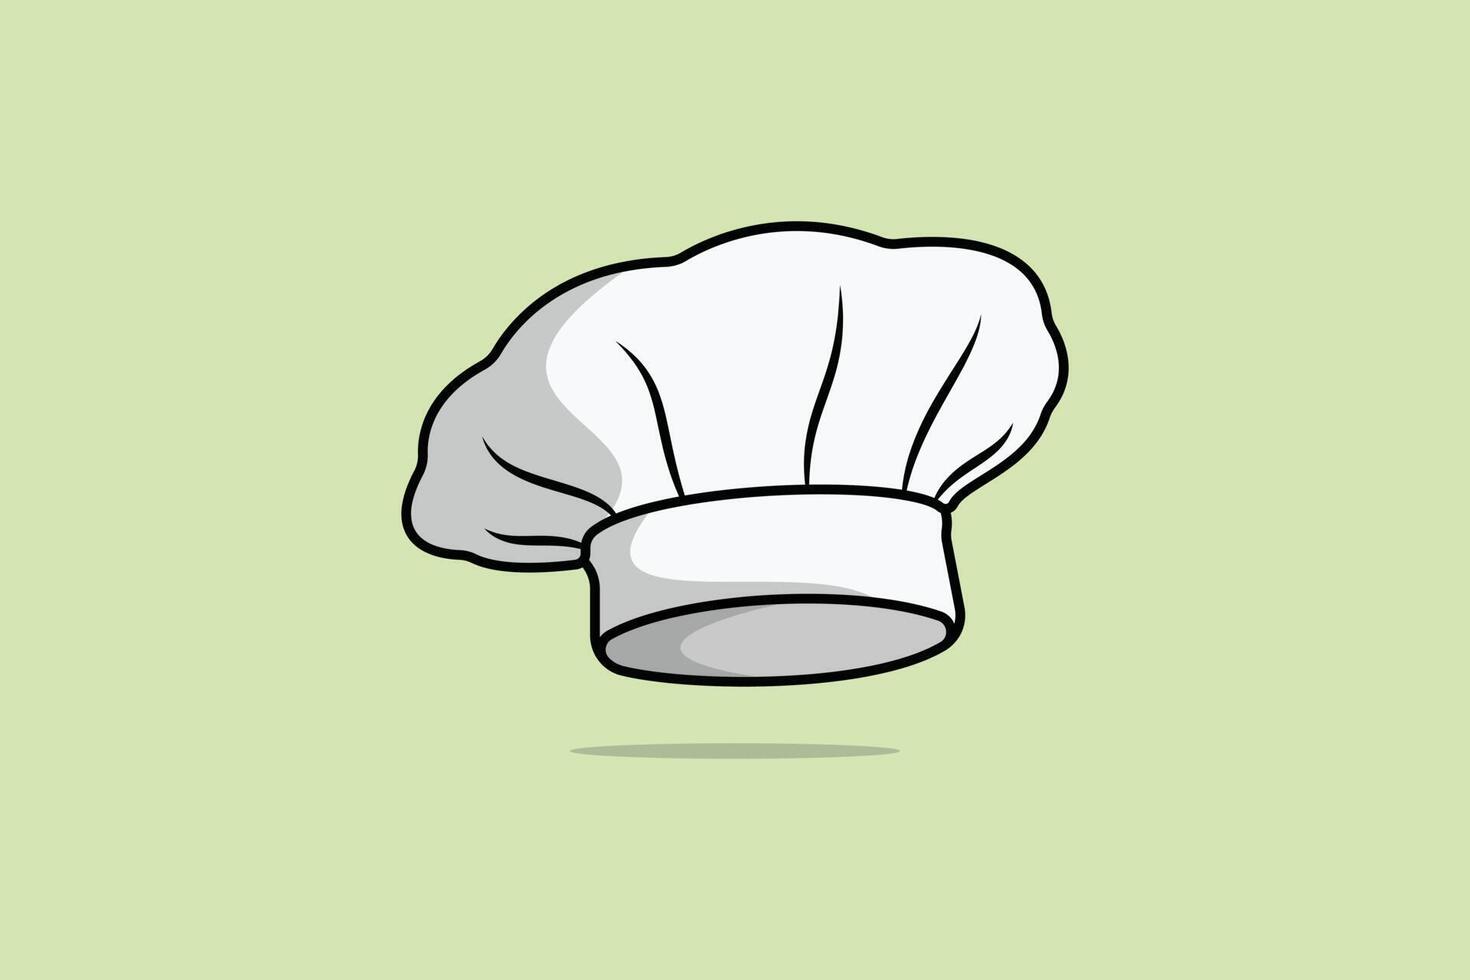 Chef White Hat cartoon vector illustration. Kitchen cooking object icon concept. Chef cooking hat vector design with shadow on light green background. Bakery logo icon concept.